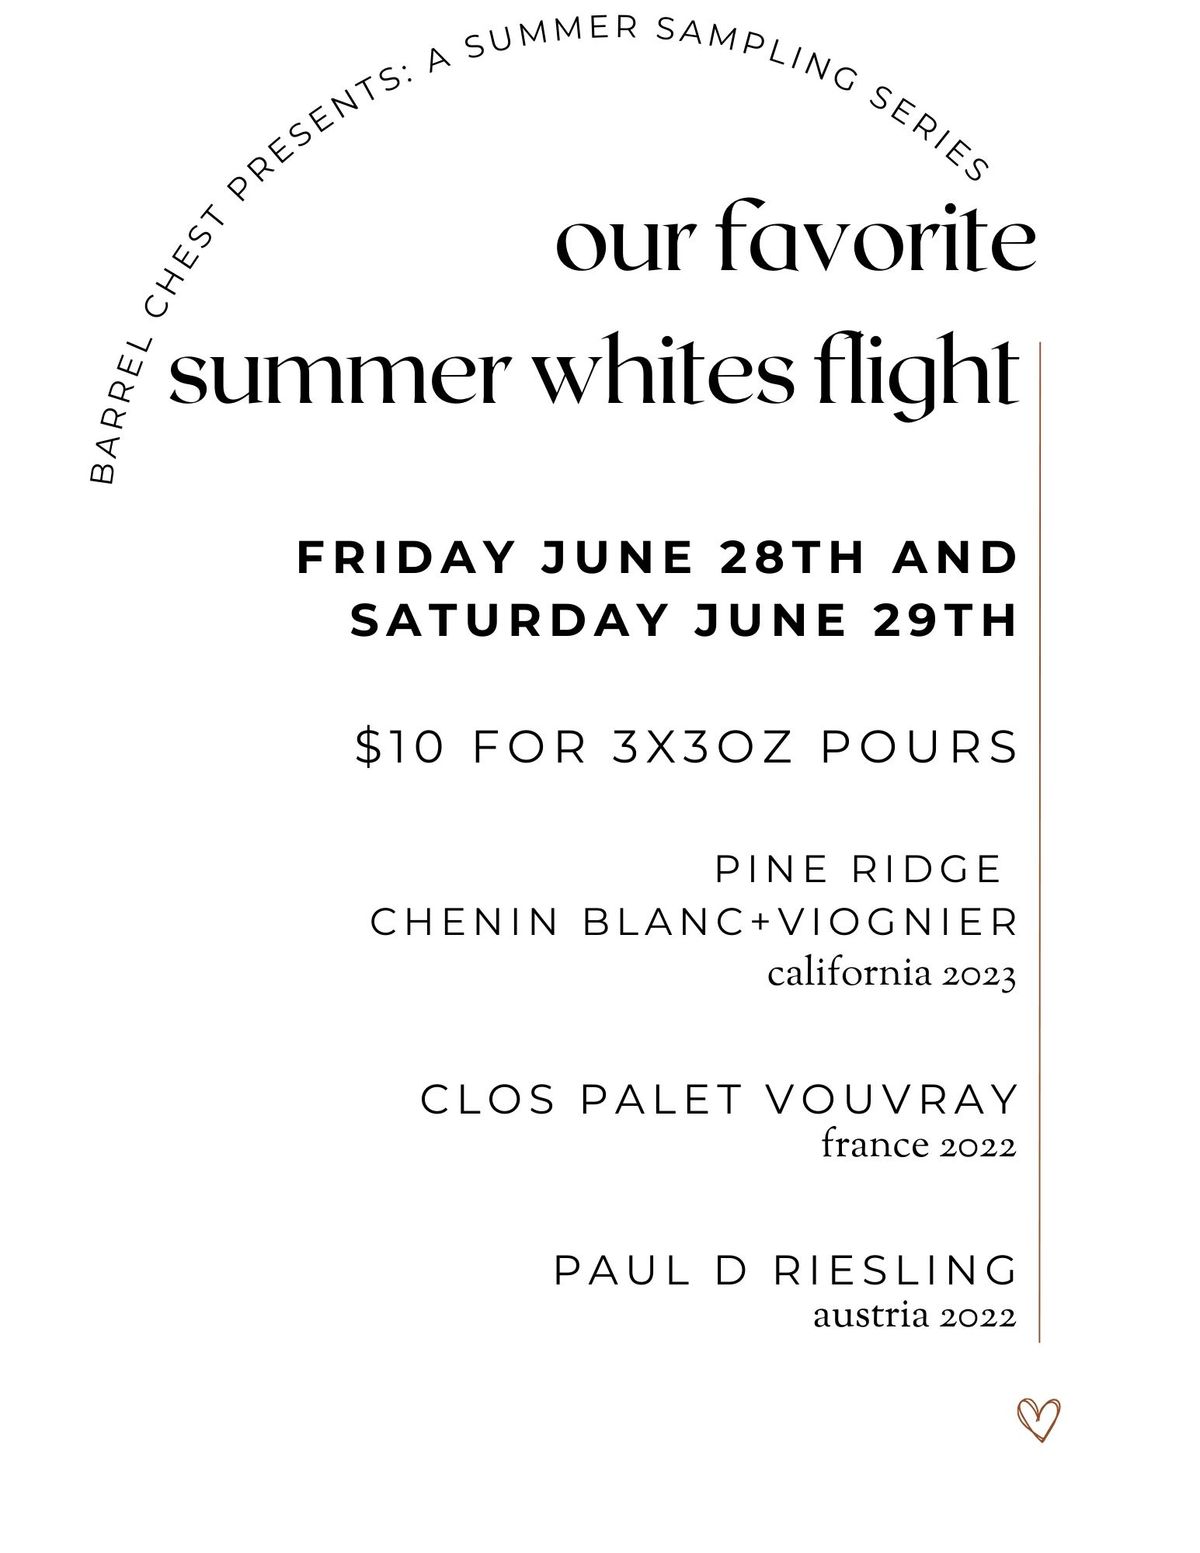 Our Favorite Summer Whites Flight: $10 for 3x3oz pours